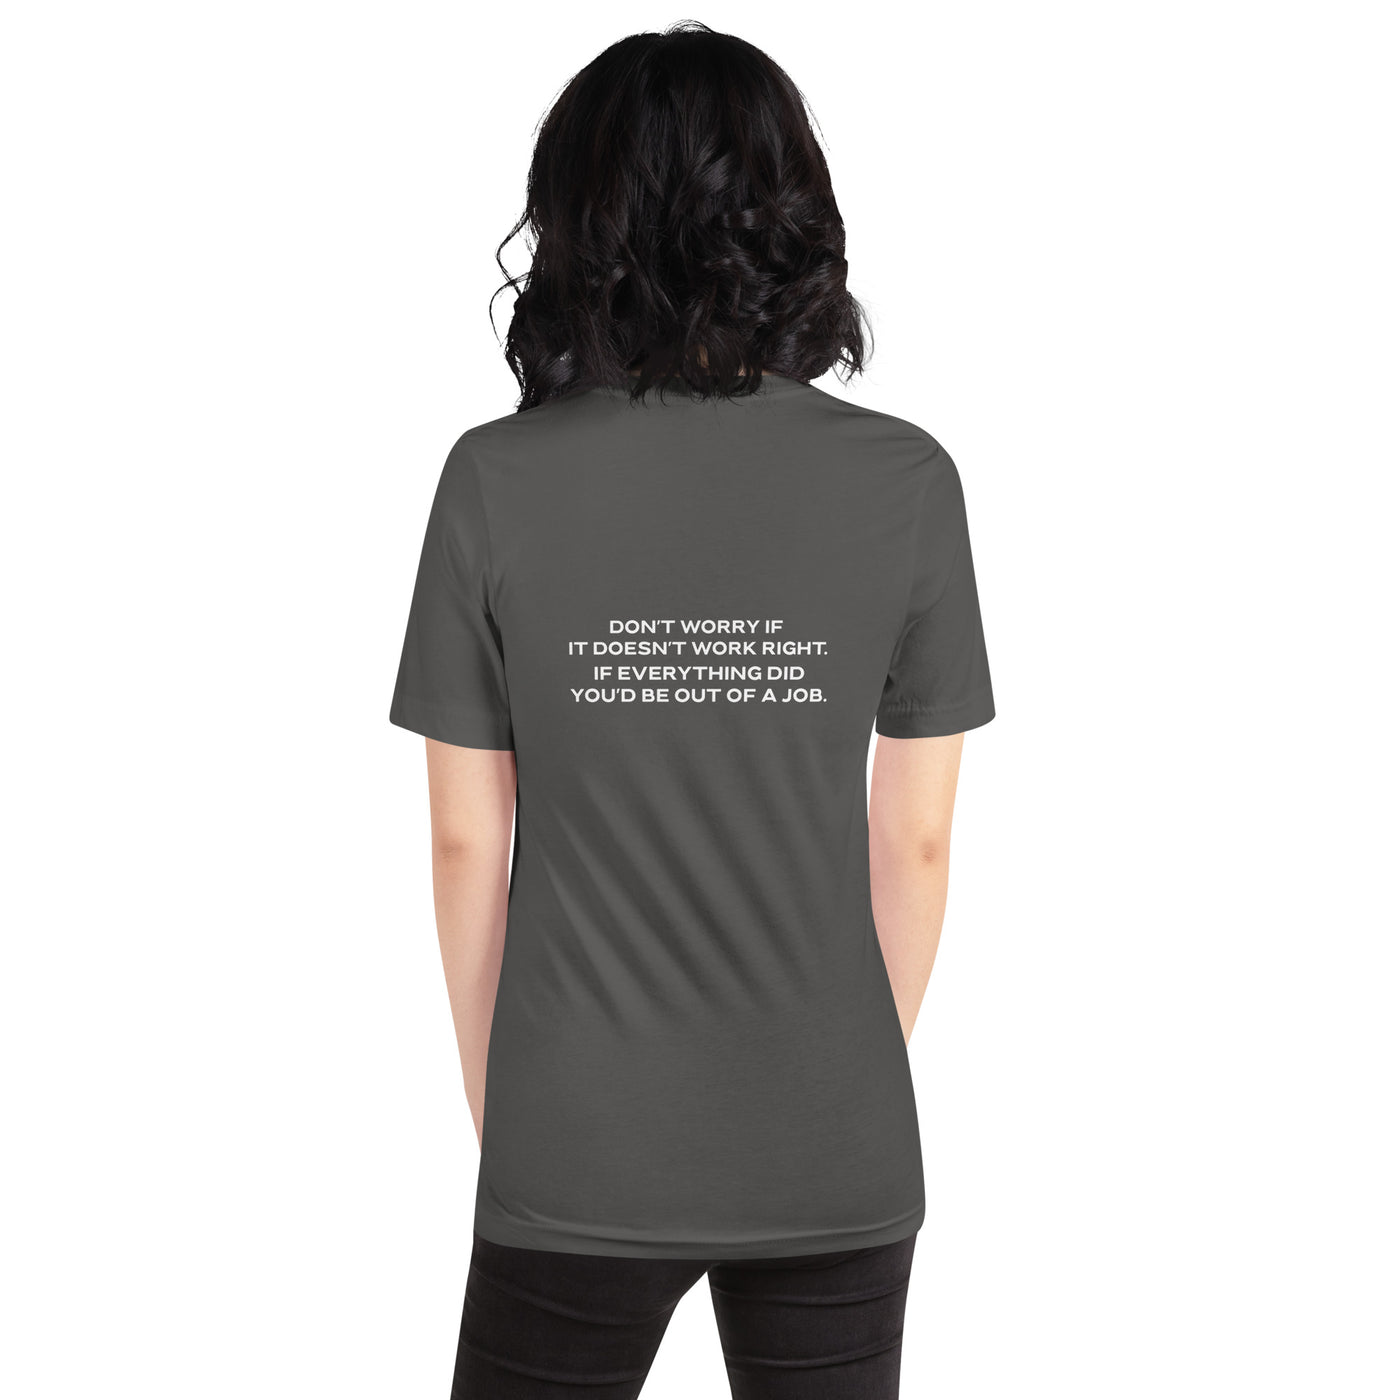 Don't worry if it doesn't work right: if everything did, you would be out of your job - Unisex t-shirt ( Back Print )